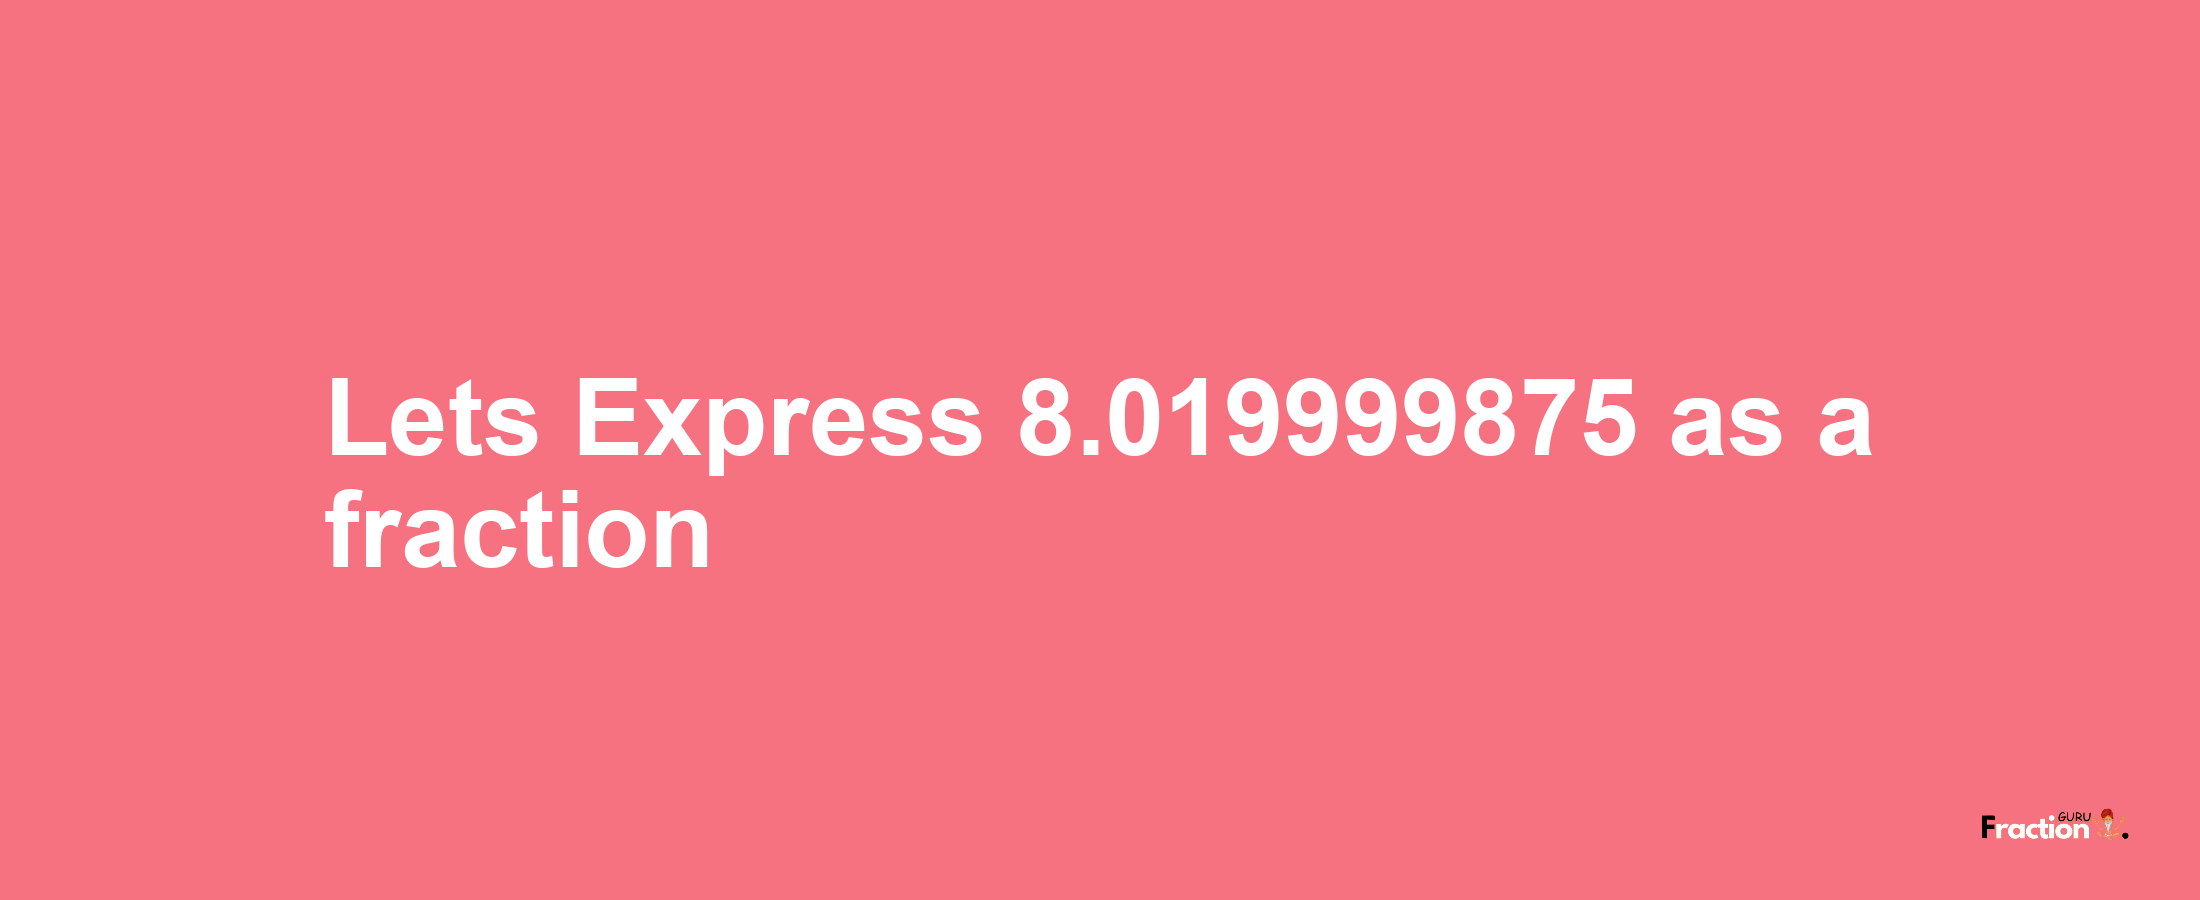 Lets Express 8.019999875 as afraction